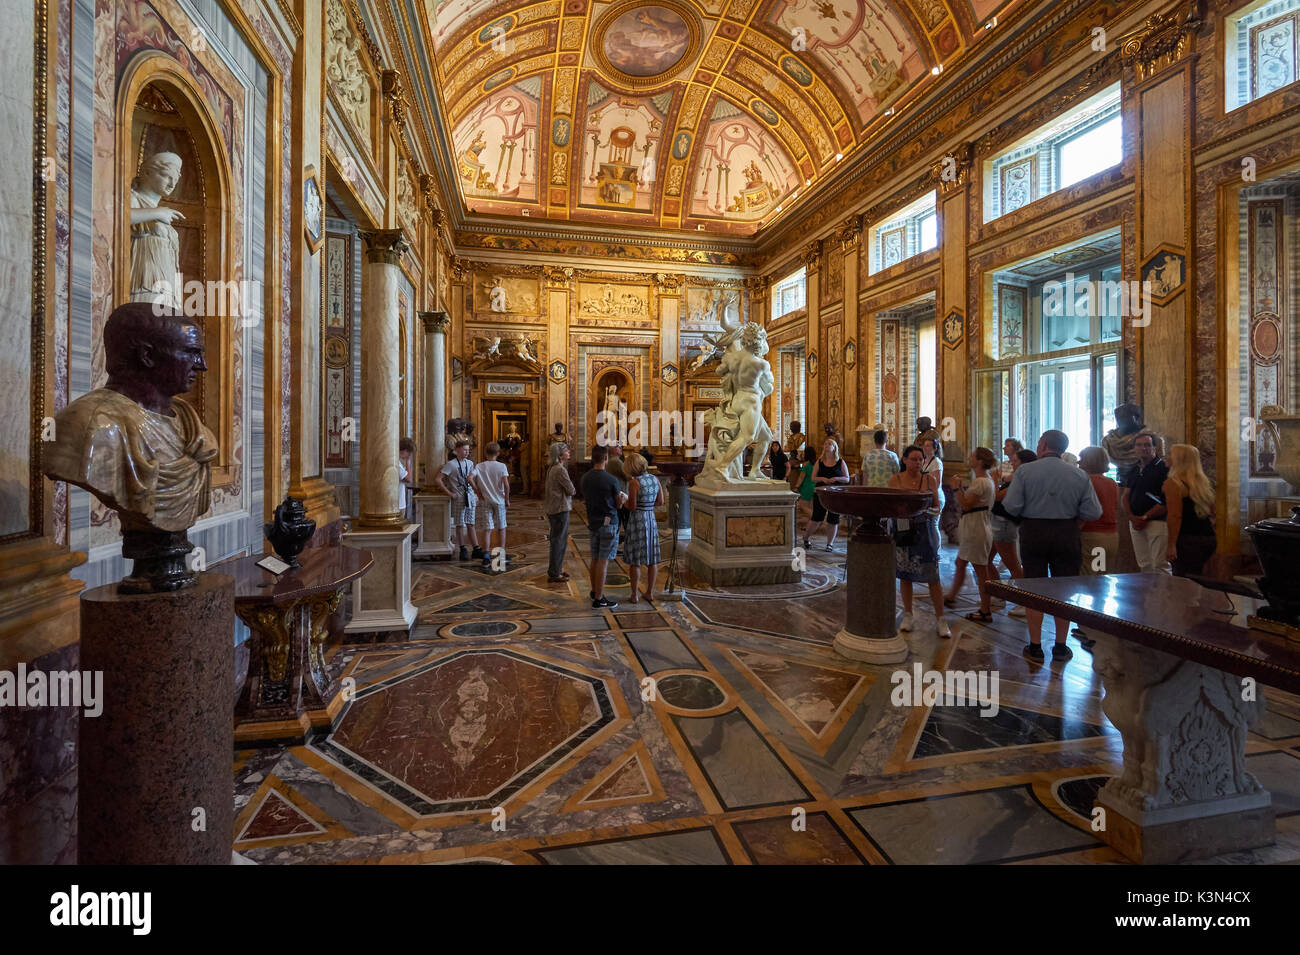 Tourists in the Galleria Borghese in Rome, Italy Stock Photo